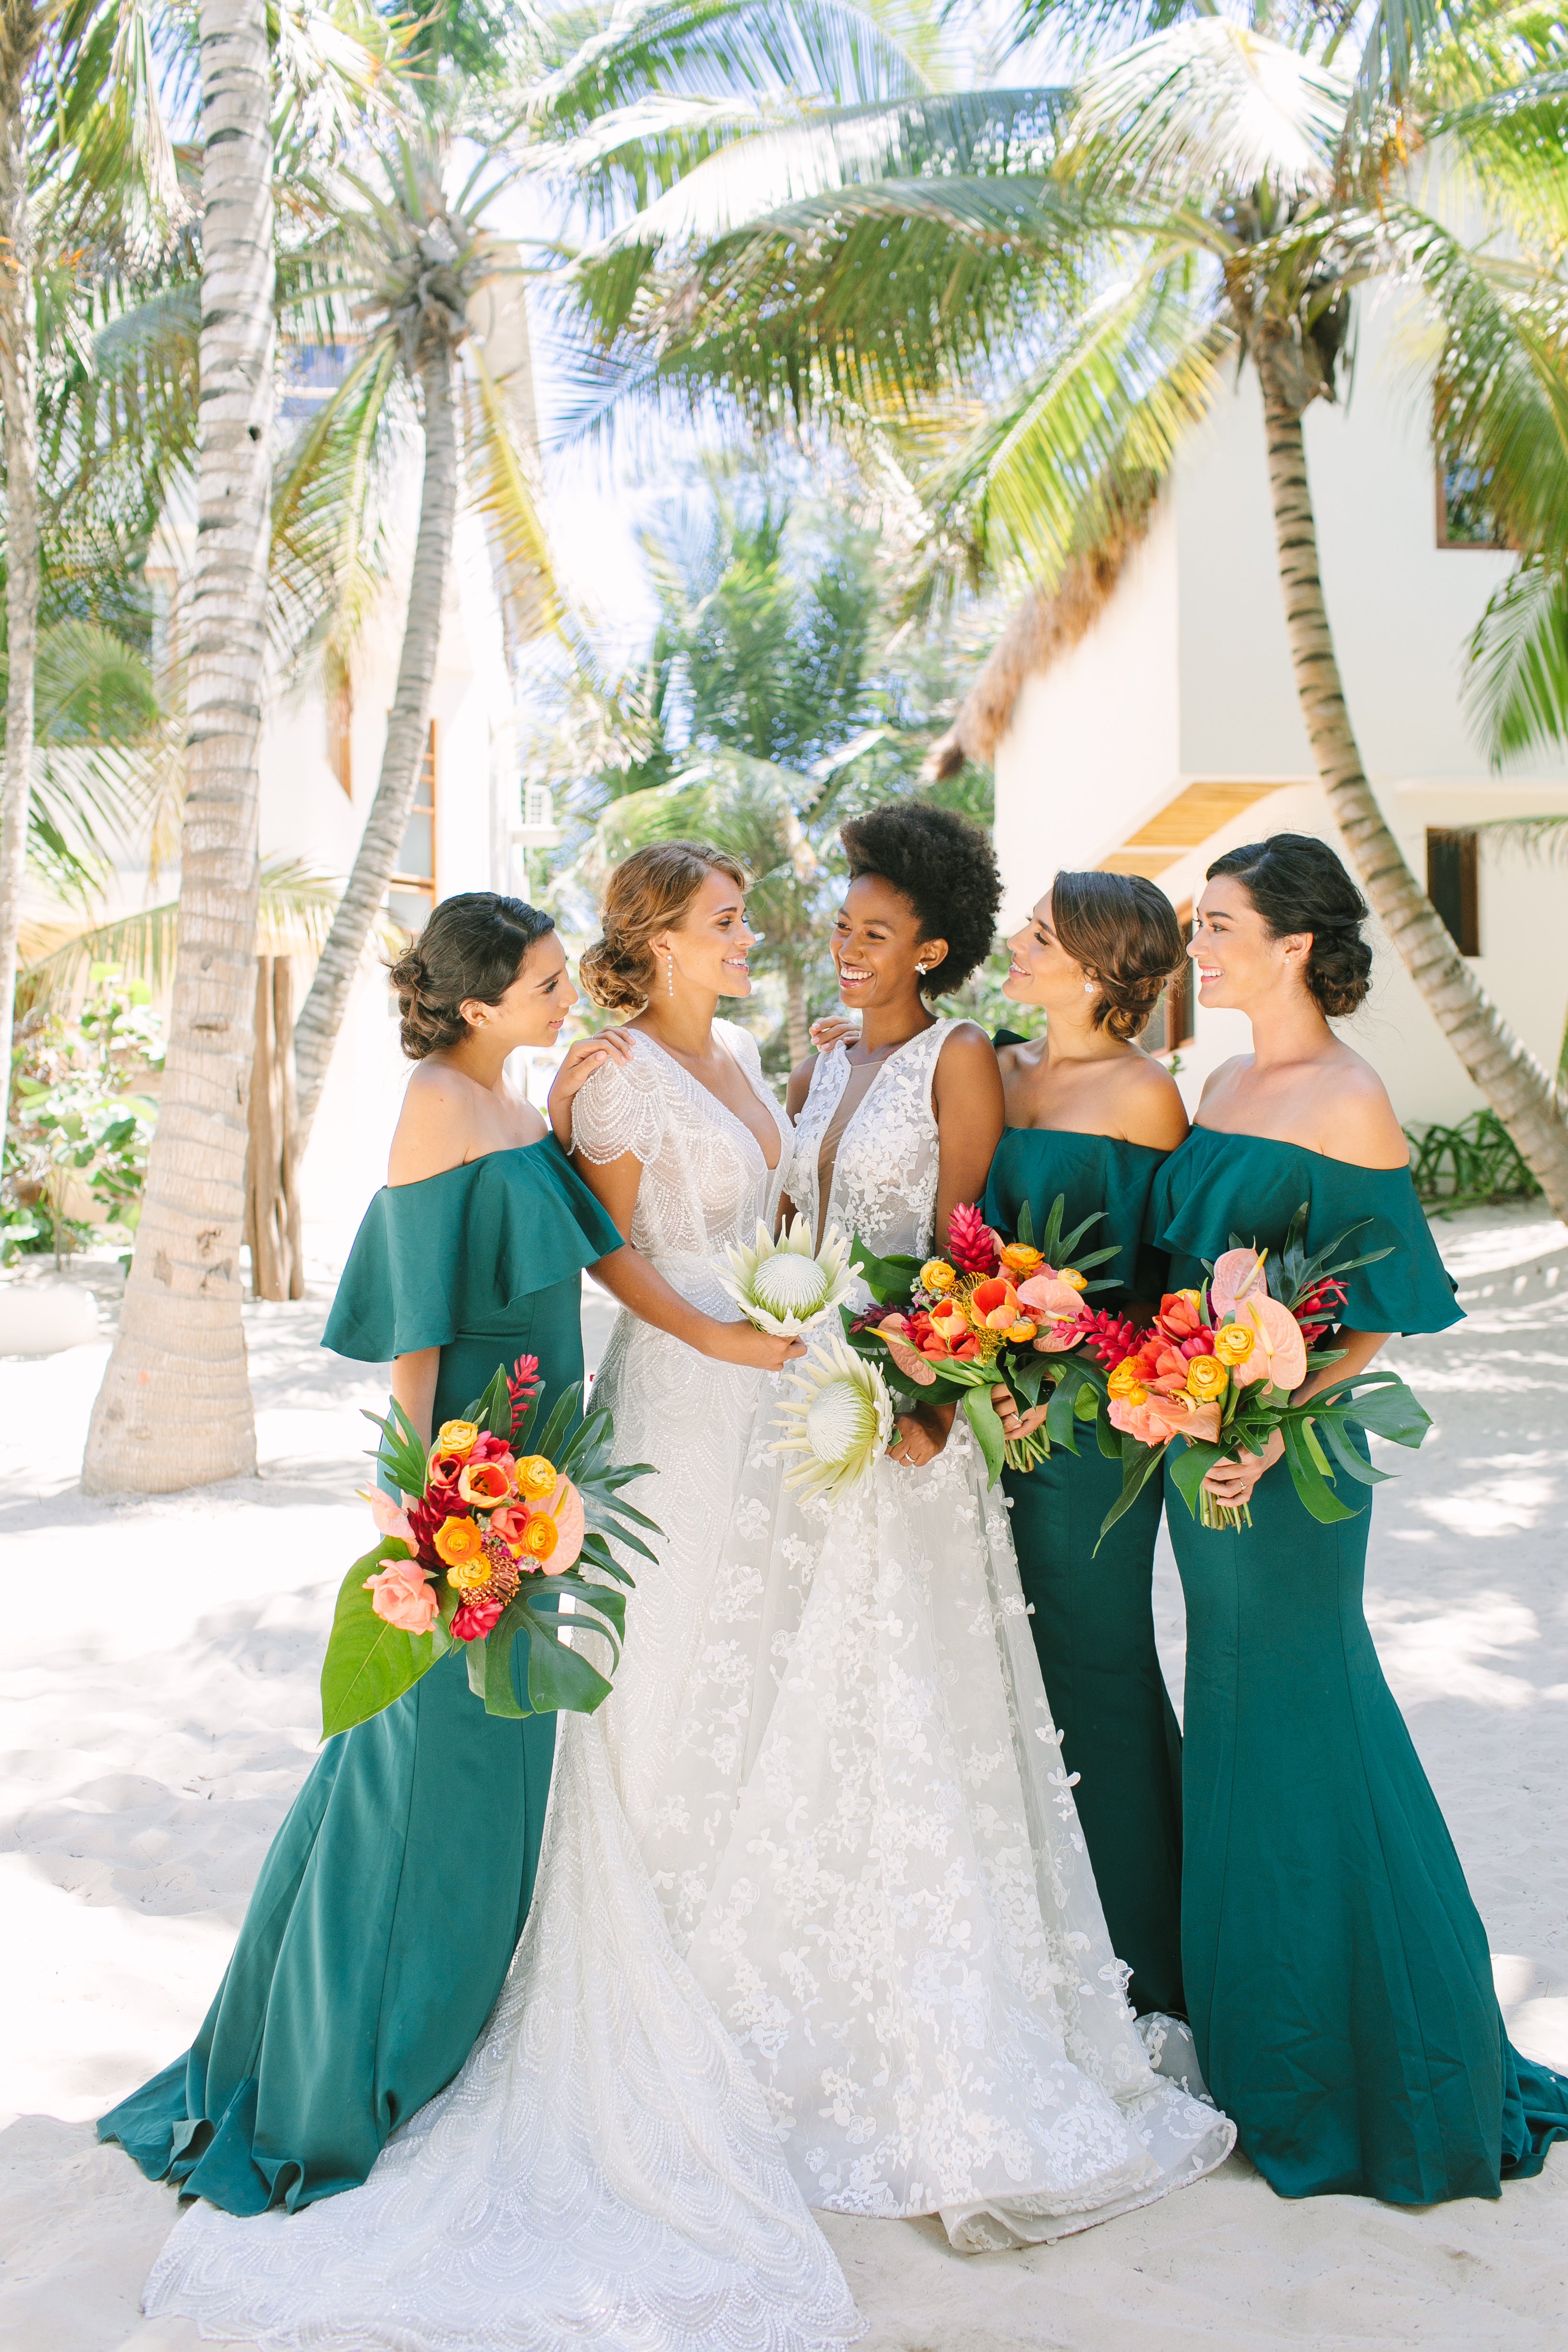 Affordable bridesmaids dresses perfect for destination weddings—We took Kleinfeld Bridal wedding dresses and Kleinfeld Bridal Party bridesmaids dresses to Tulum, Mexico for a fun photoshoot on the beach full of flowers, sun, sand and fun!